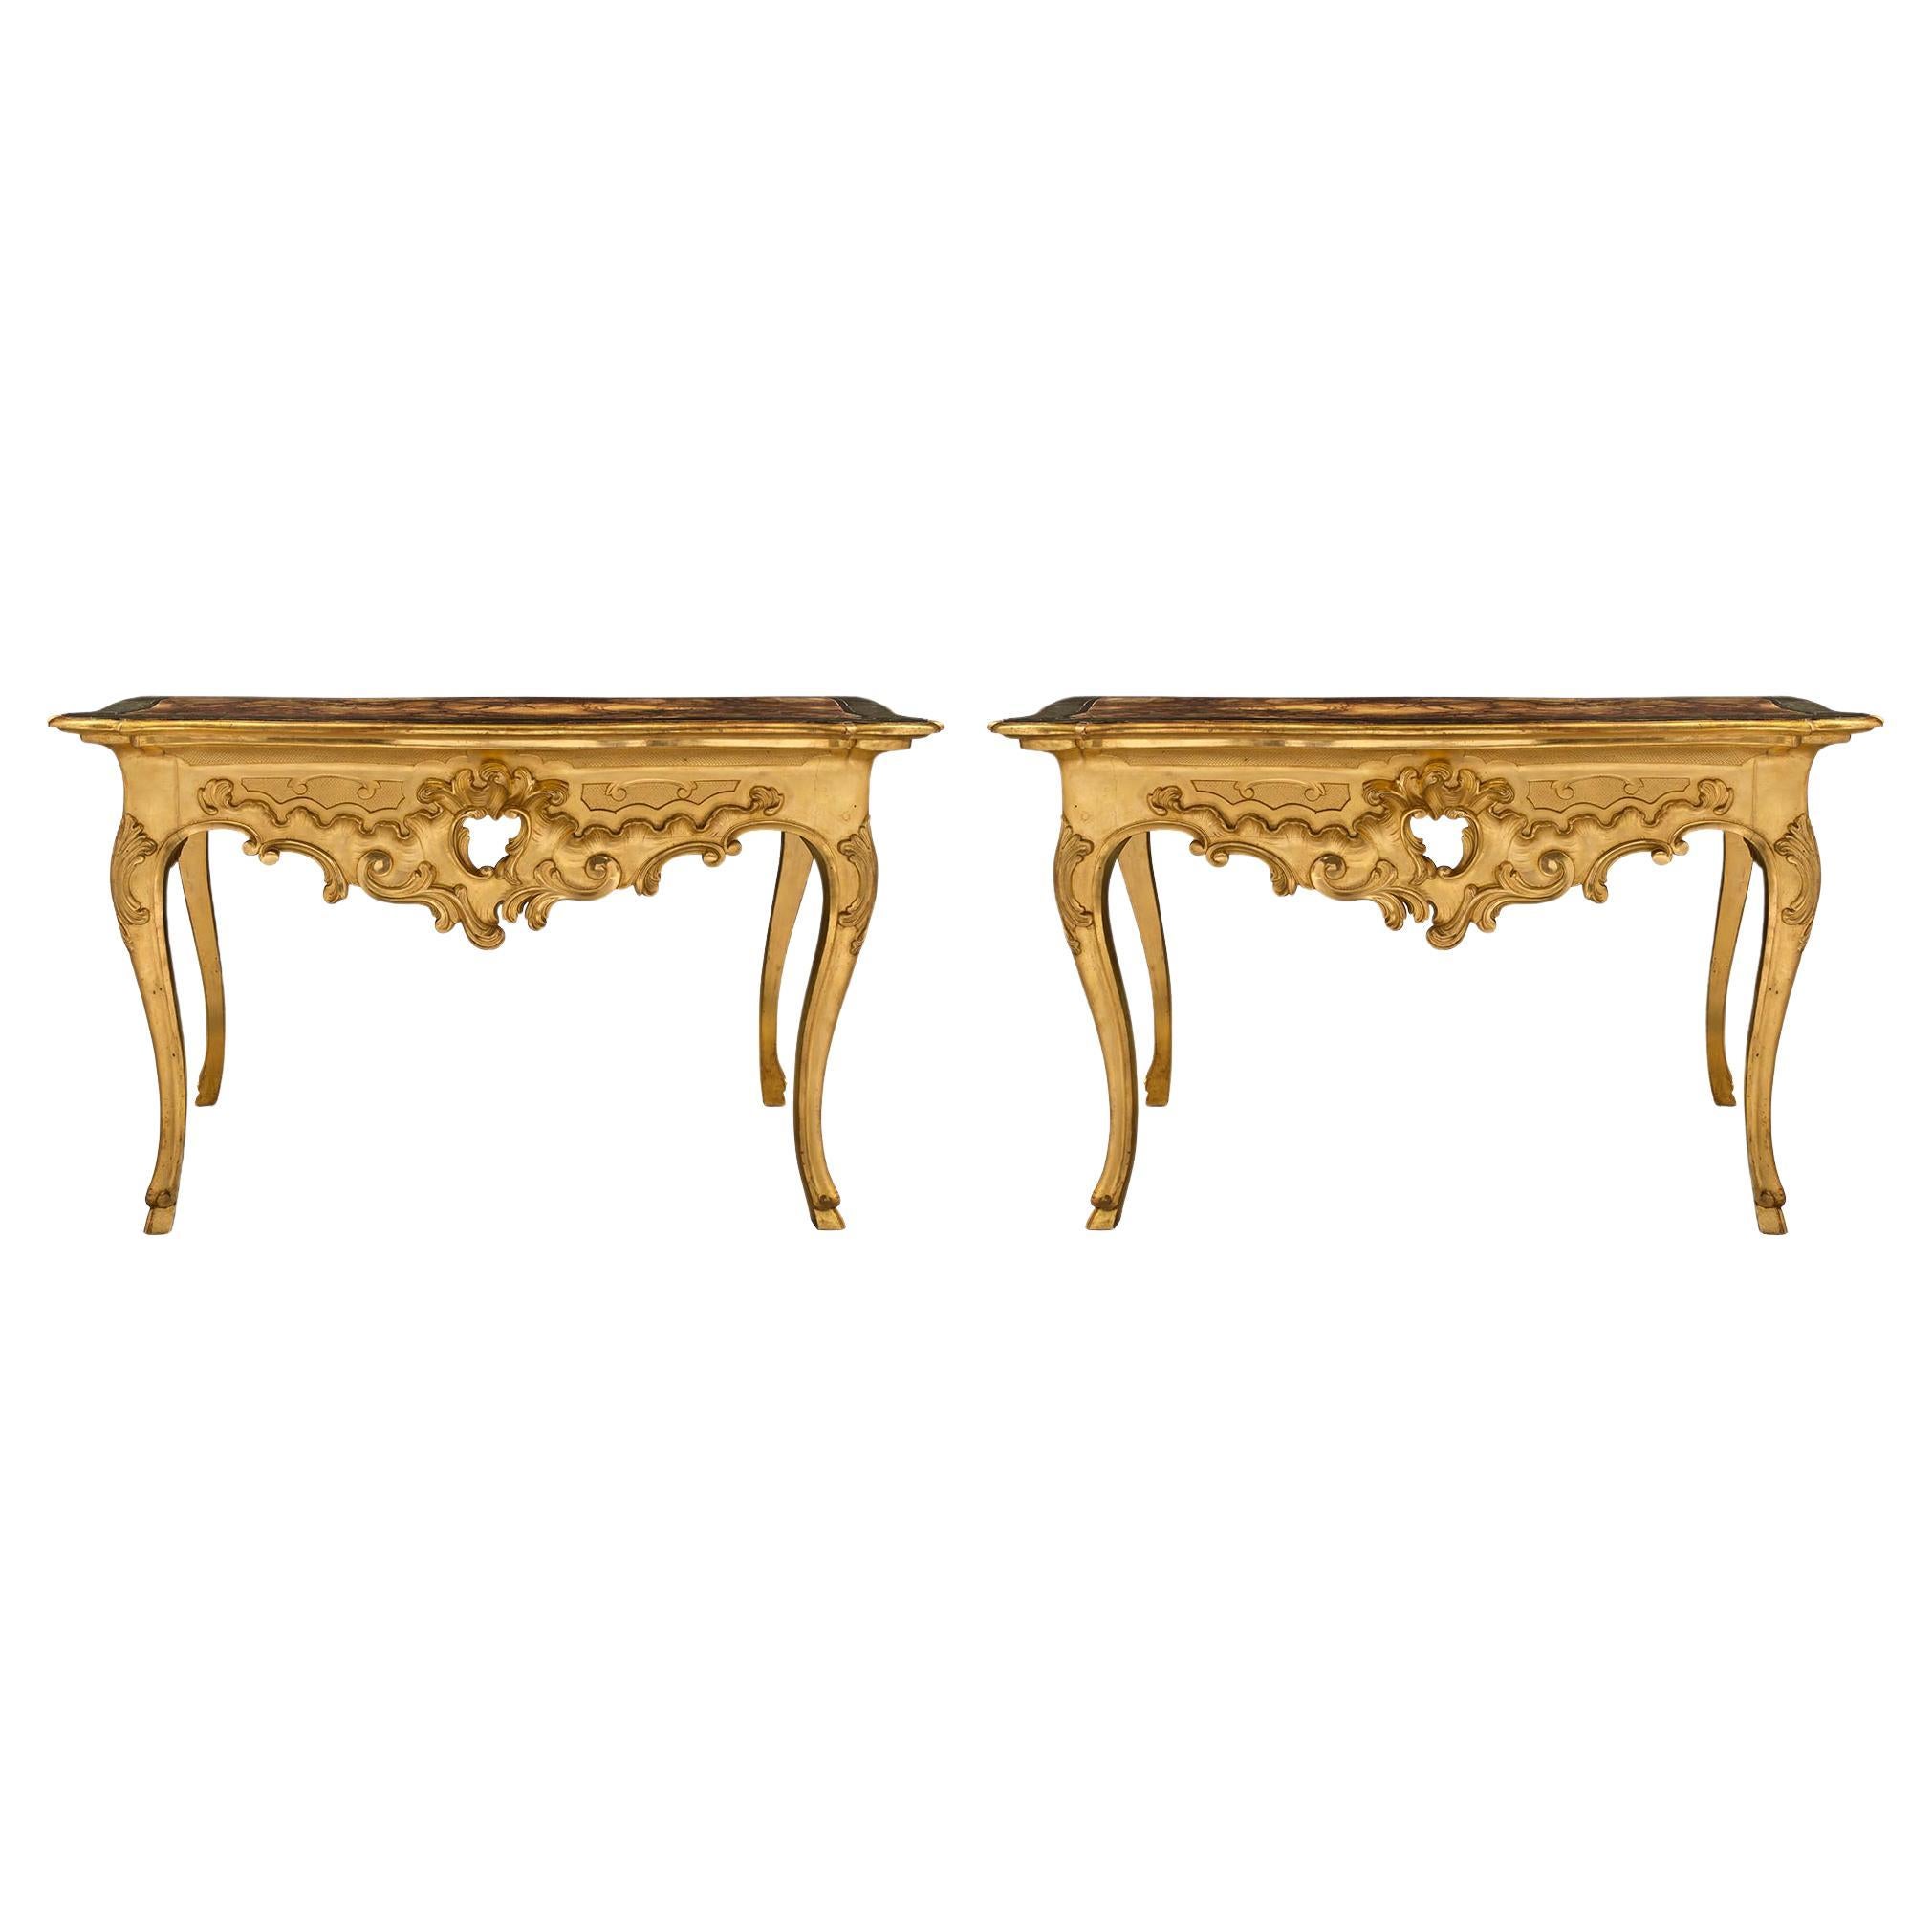 Pair of Italian 18th Century Louis XV Period Giltwood and Faux Marble Consoles